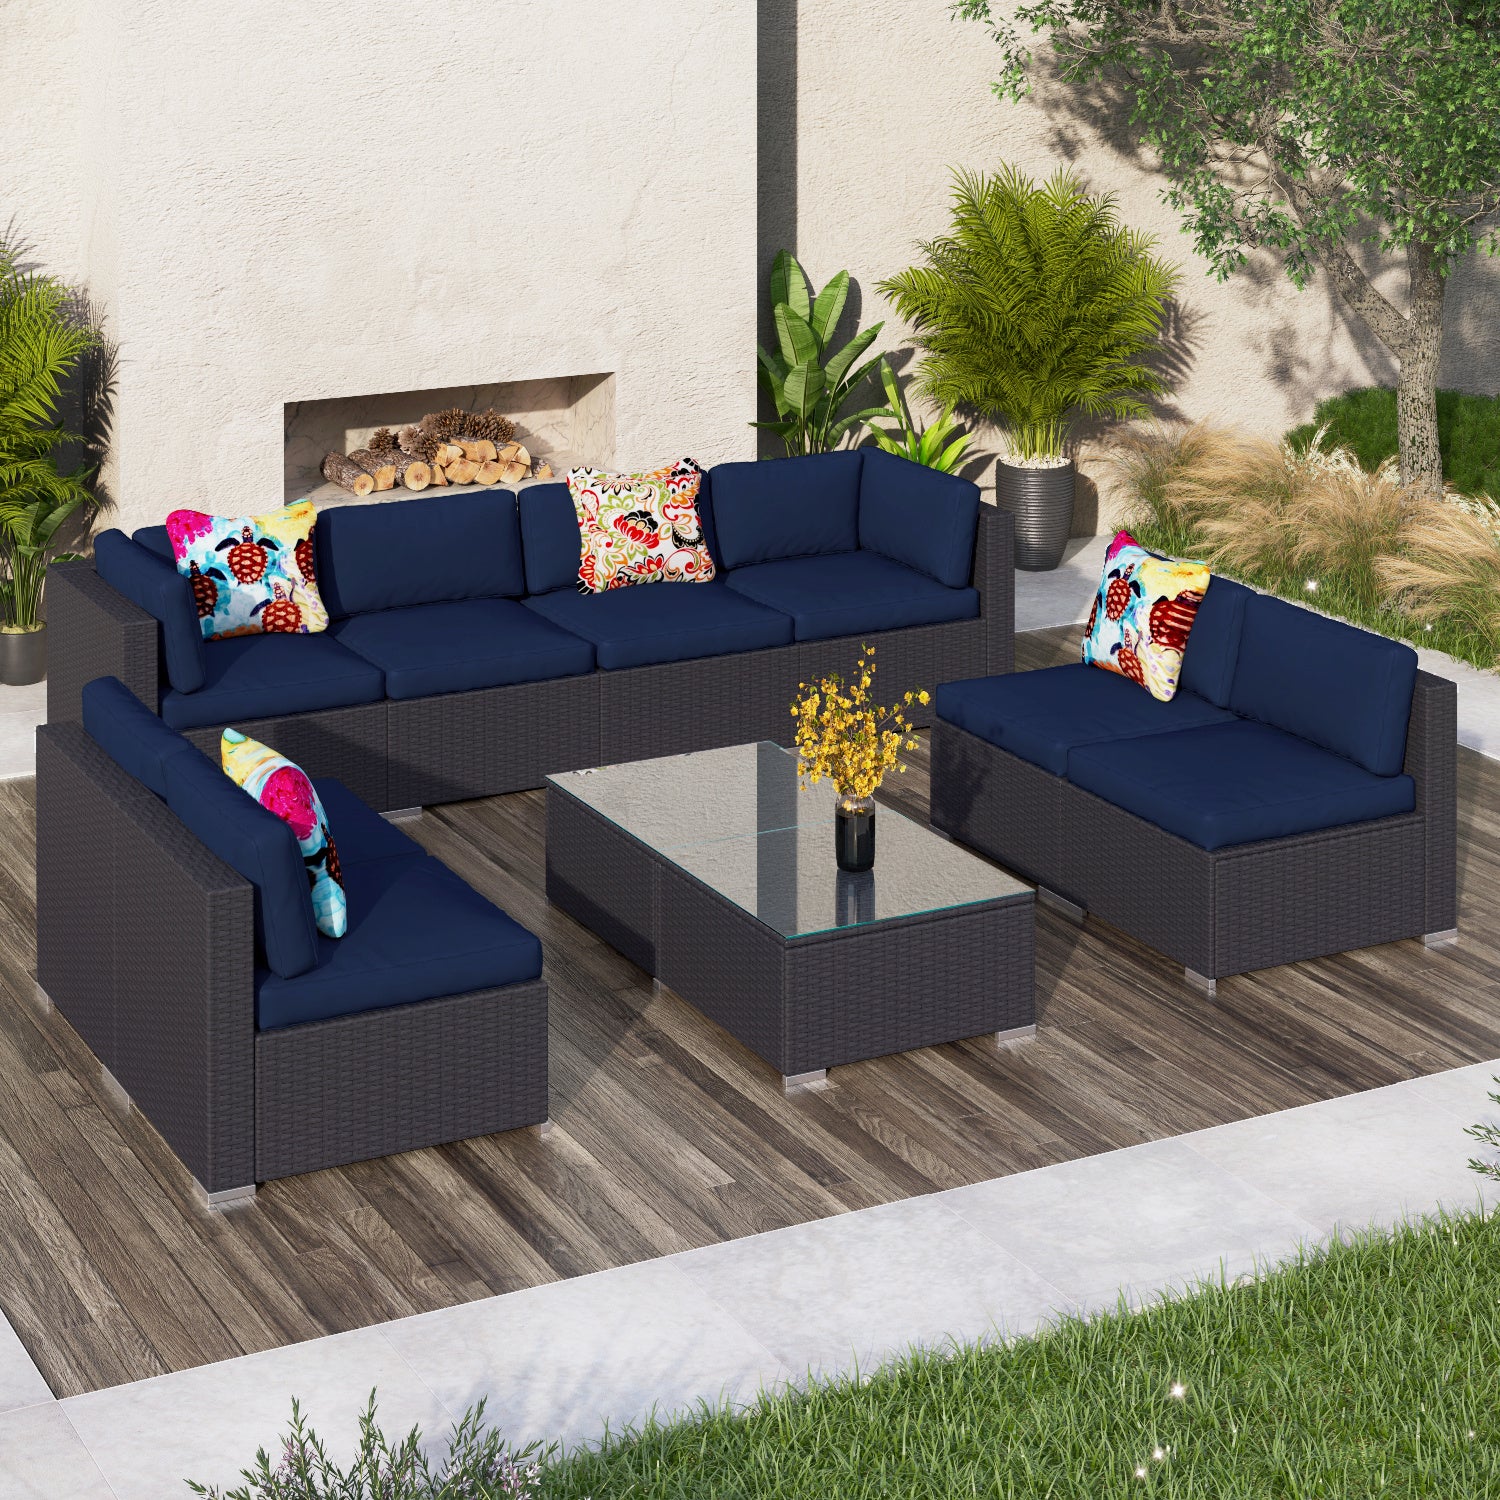 Sophia & William 10 Pcs Wicker Rattan Outdoor Sectionals Patio Conversation Sets - Blue - image 1 of 6